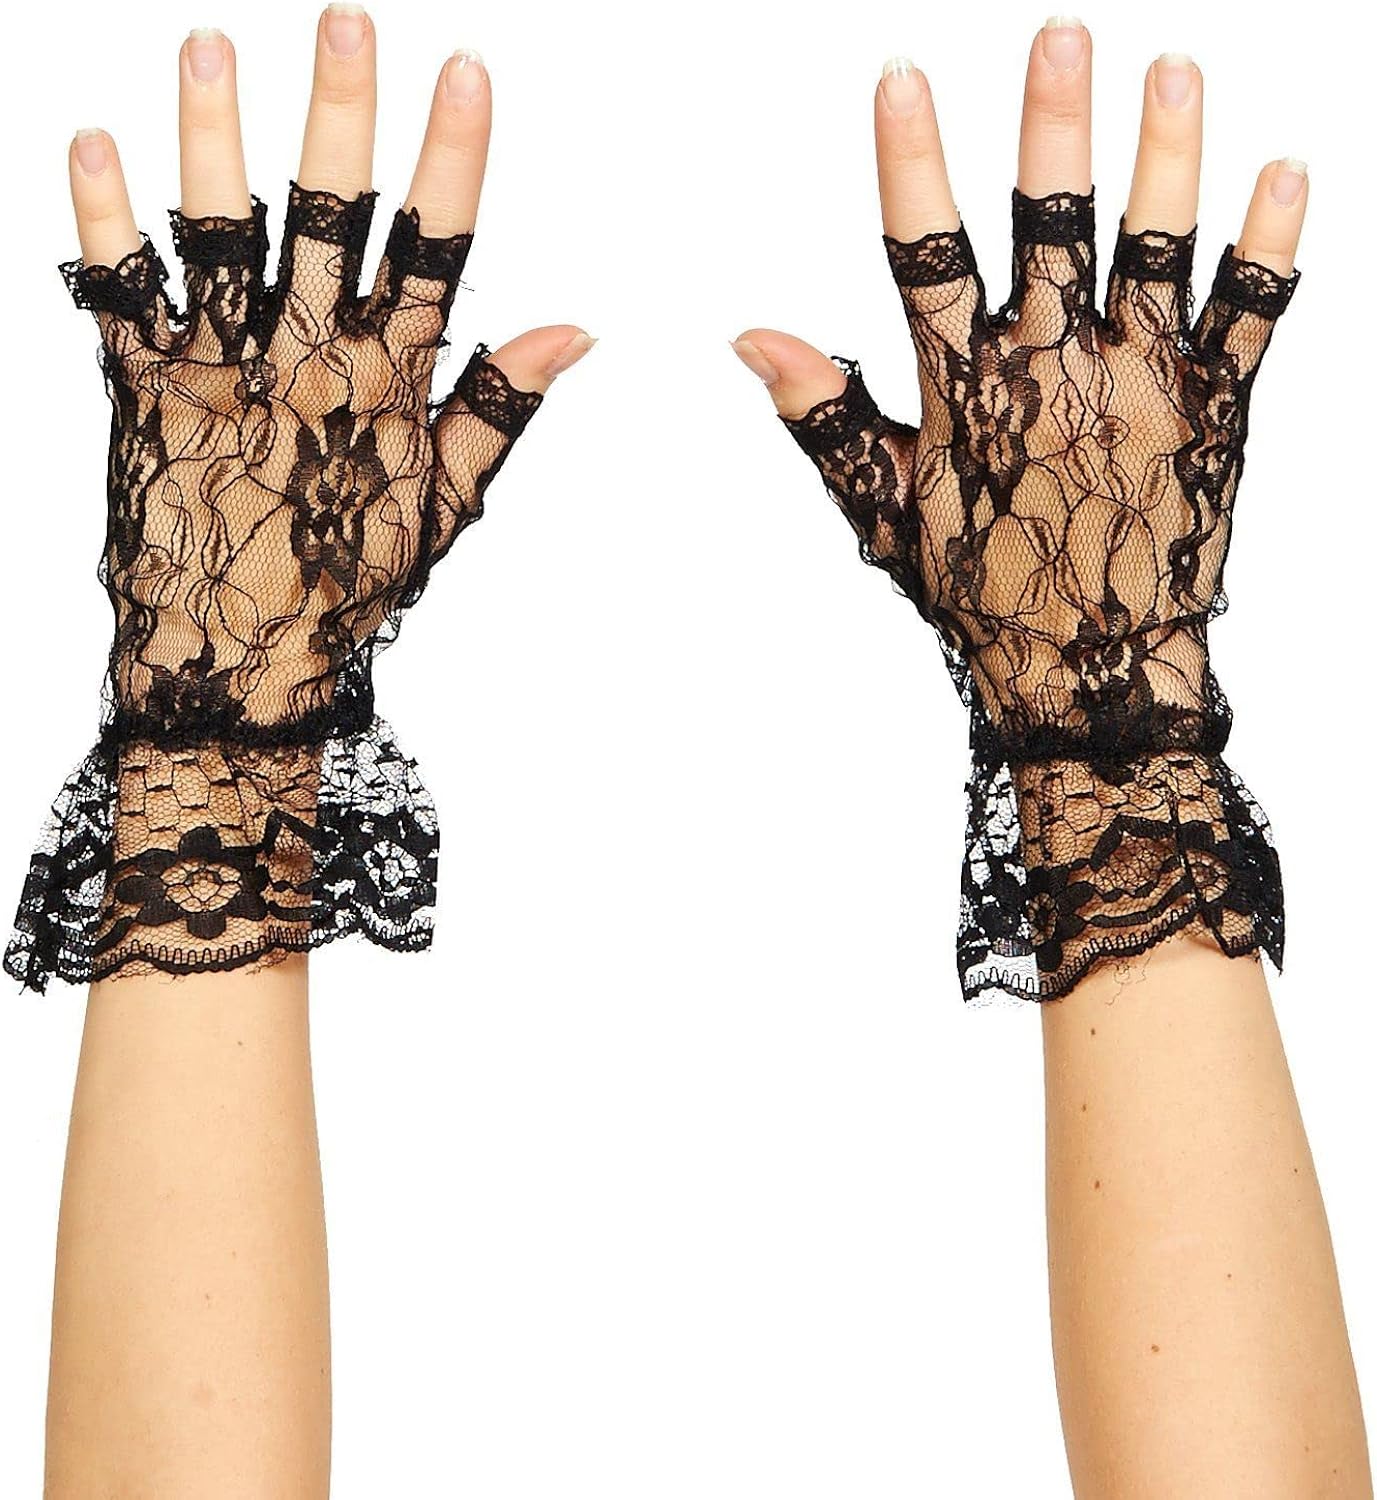 Black Lace Fingerless Gloves - One Size Womens Halloween Party Accessory